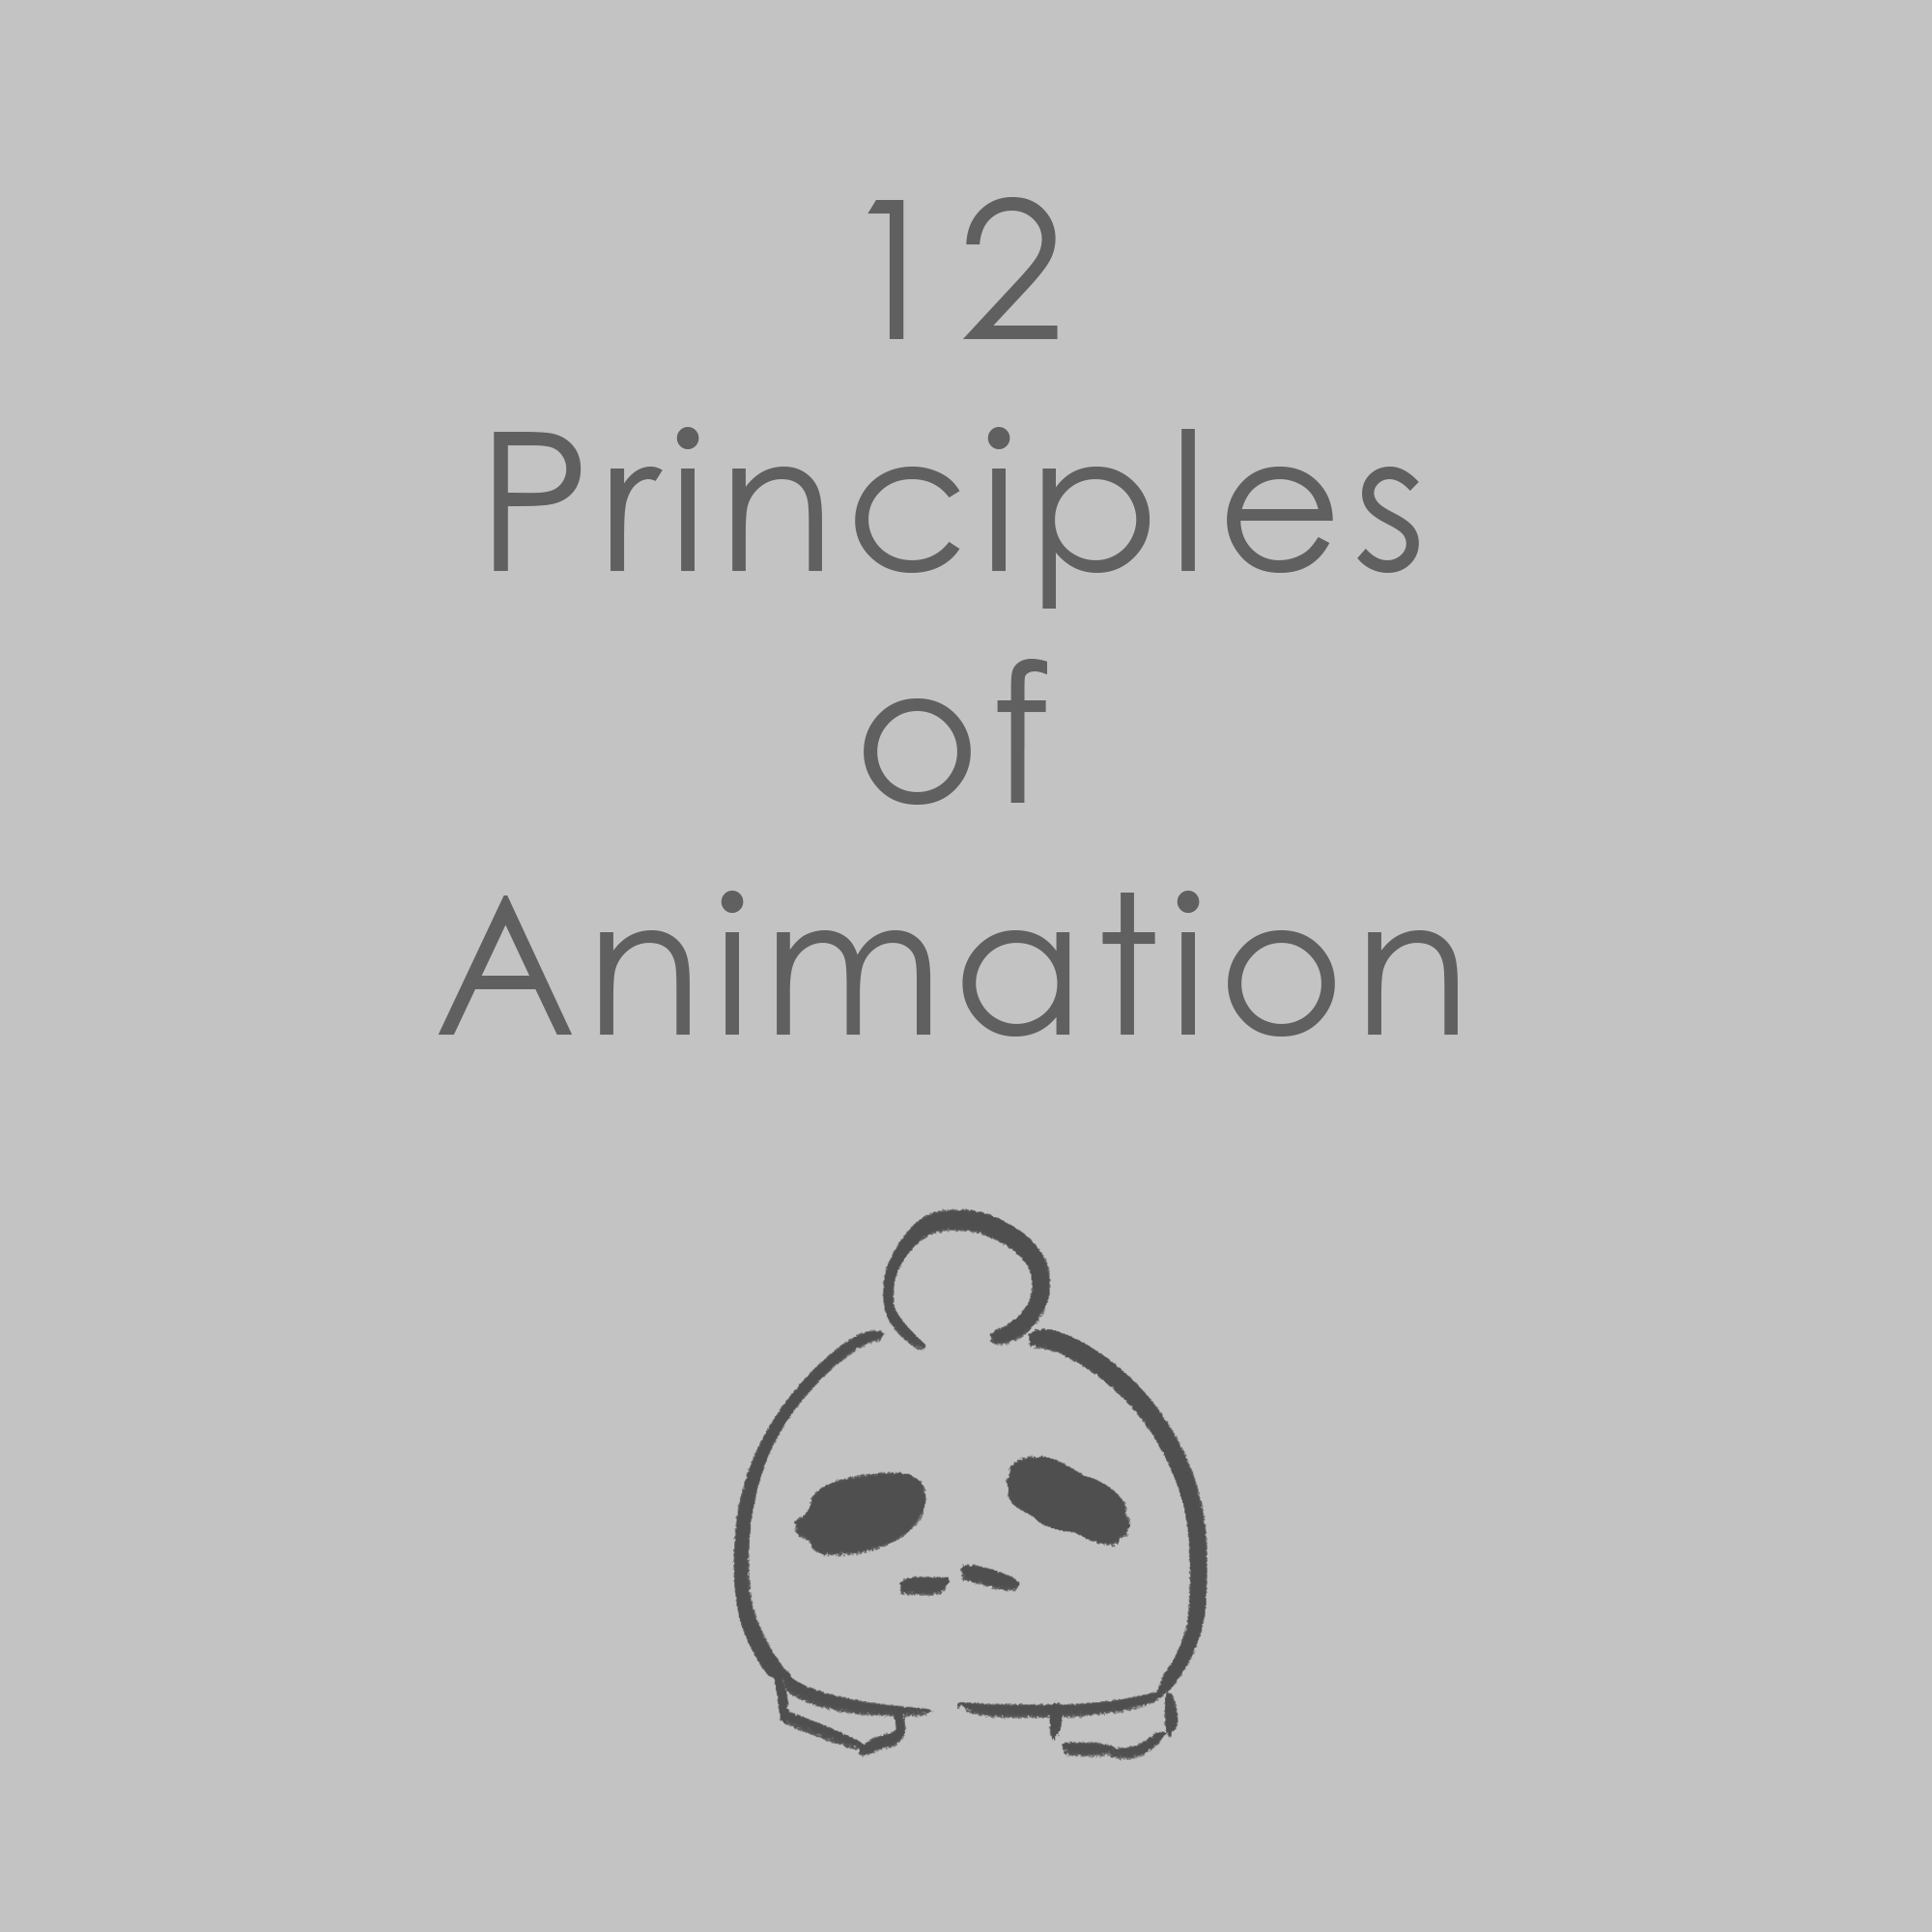 12 Principles of Animation by LeoQuint on DeviantArt